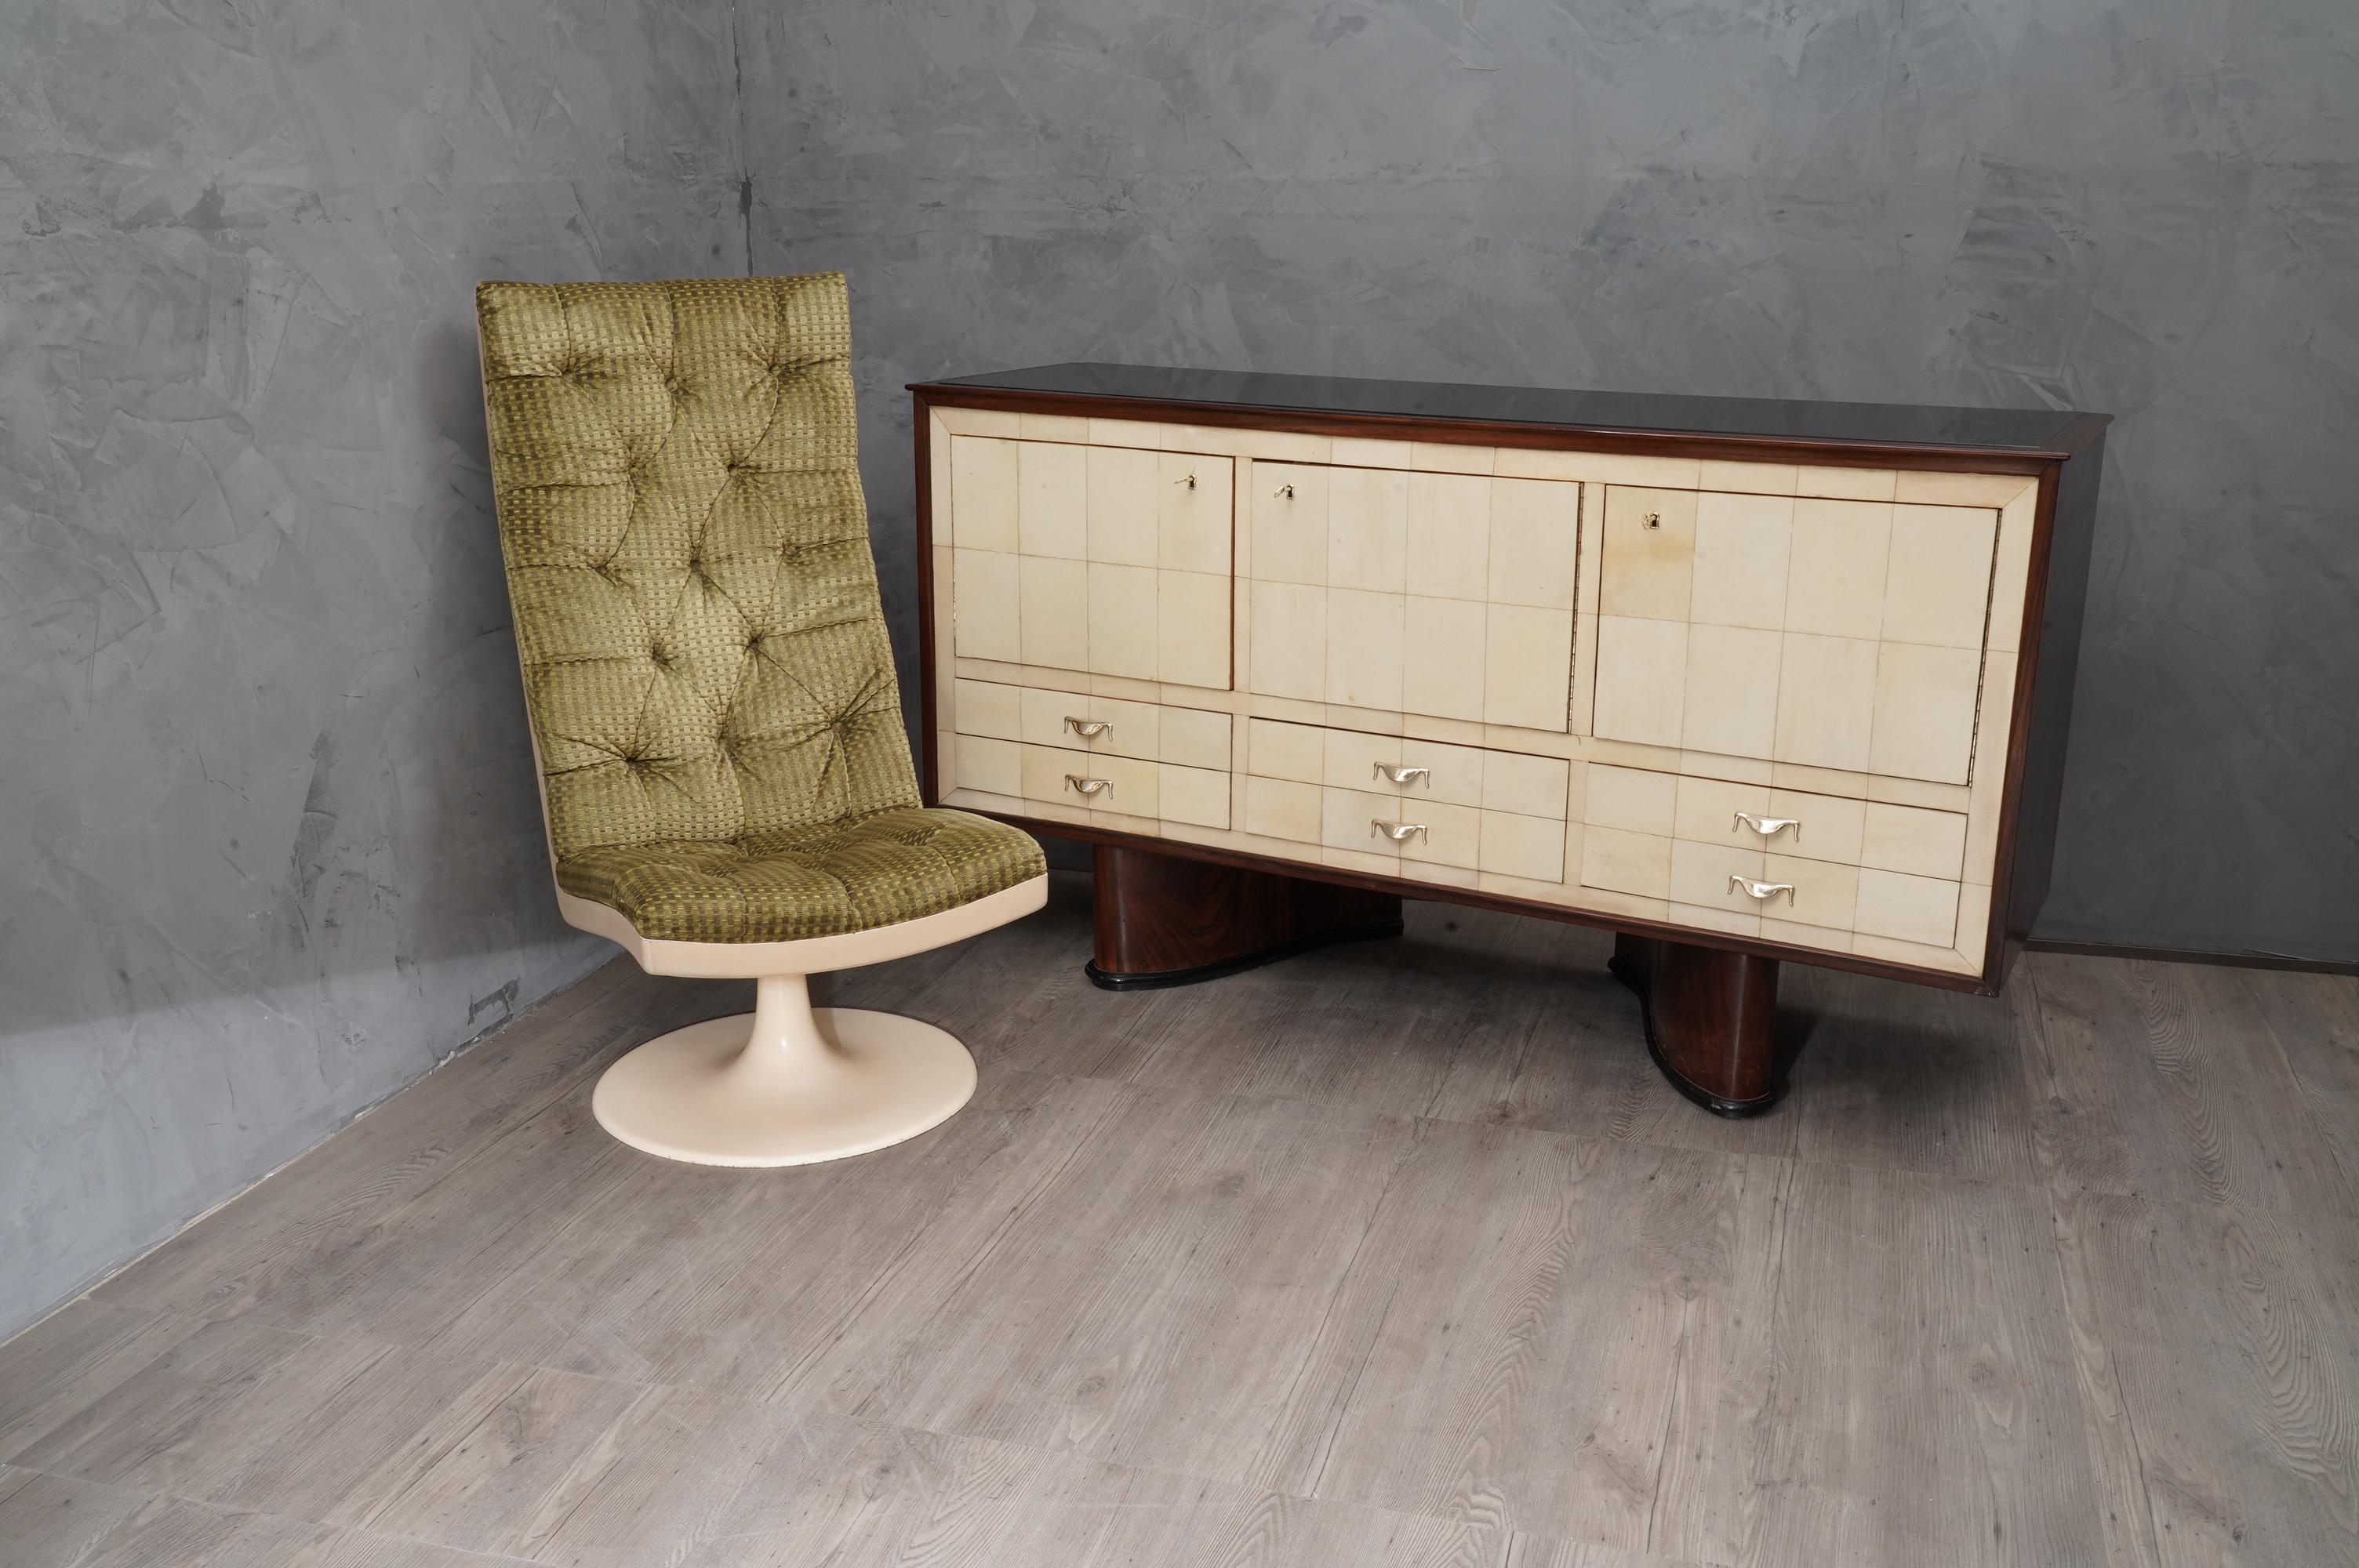 Splendid storage unit due to the use of special materials such as walnut goatskin and glass; in perfect union with brass handles and keys.

Italian sideboard all veneered of walnut wood, with front covered in goatskin. The top is instead in black